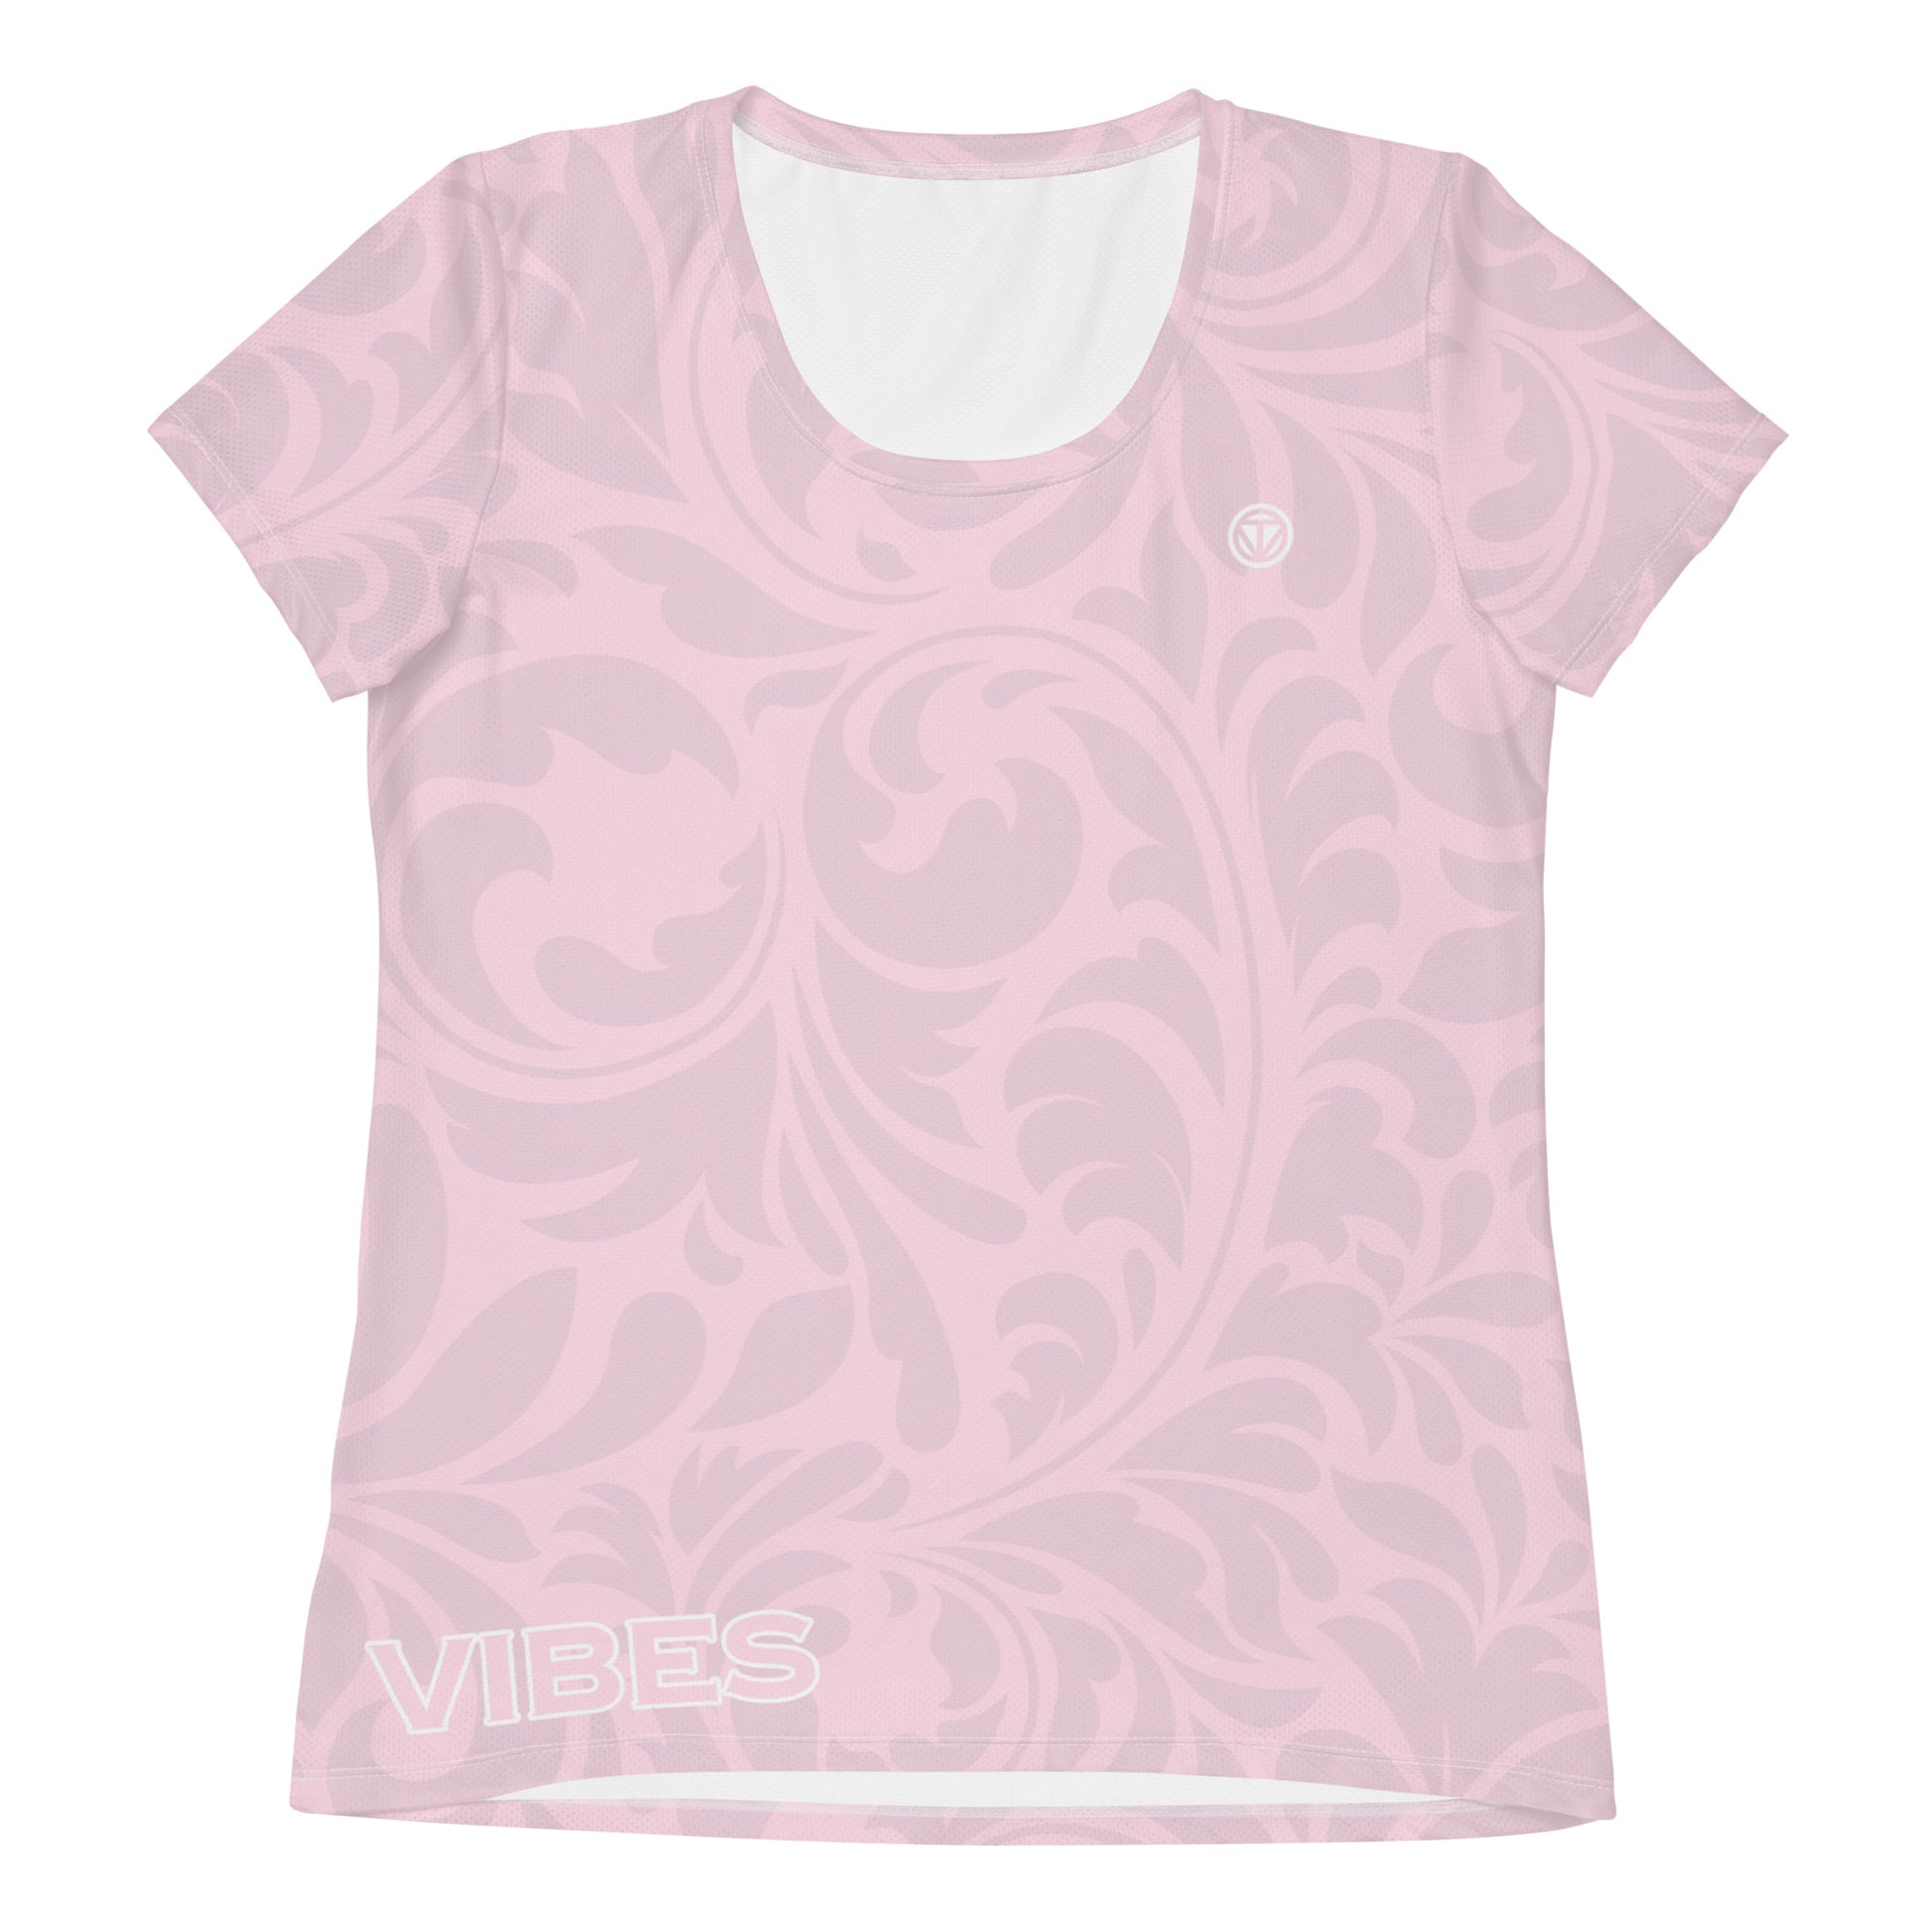 TIME OF VIBES - Women's Athletic T-shirt FLORAL (Pink) - €45.00